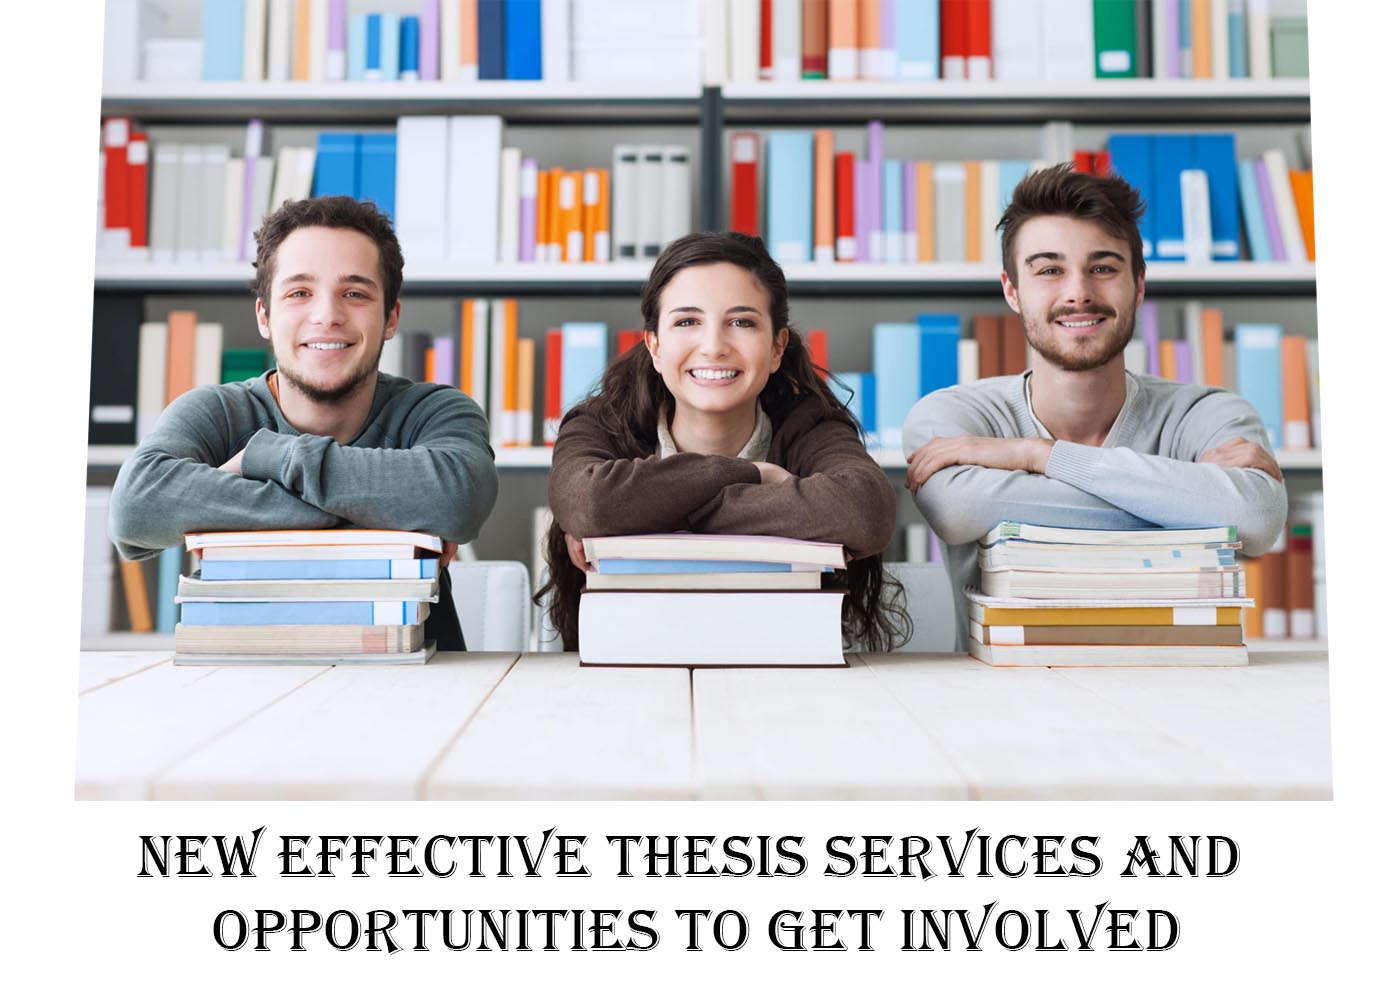 New Effective Thesis services and opportunities to get involved